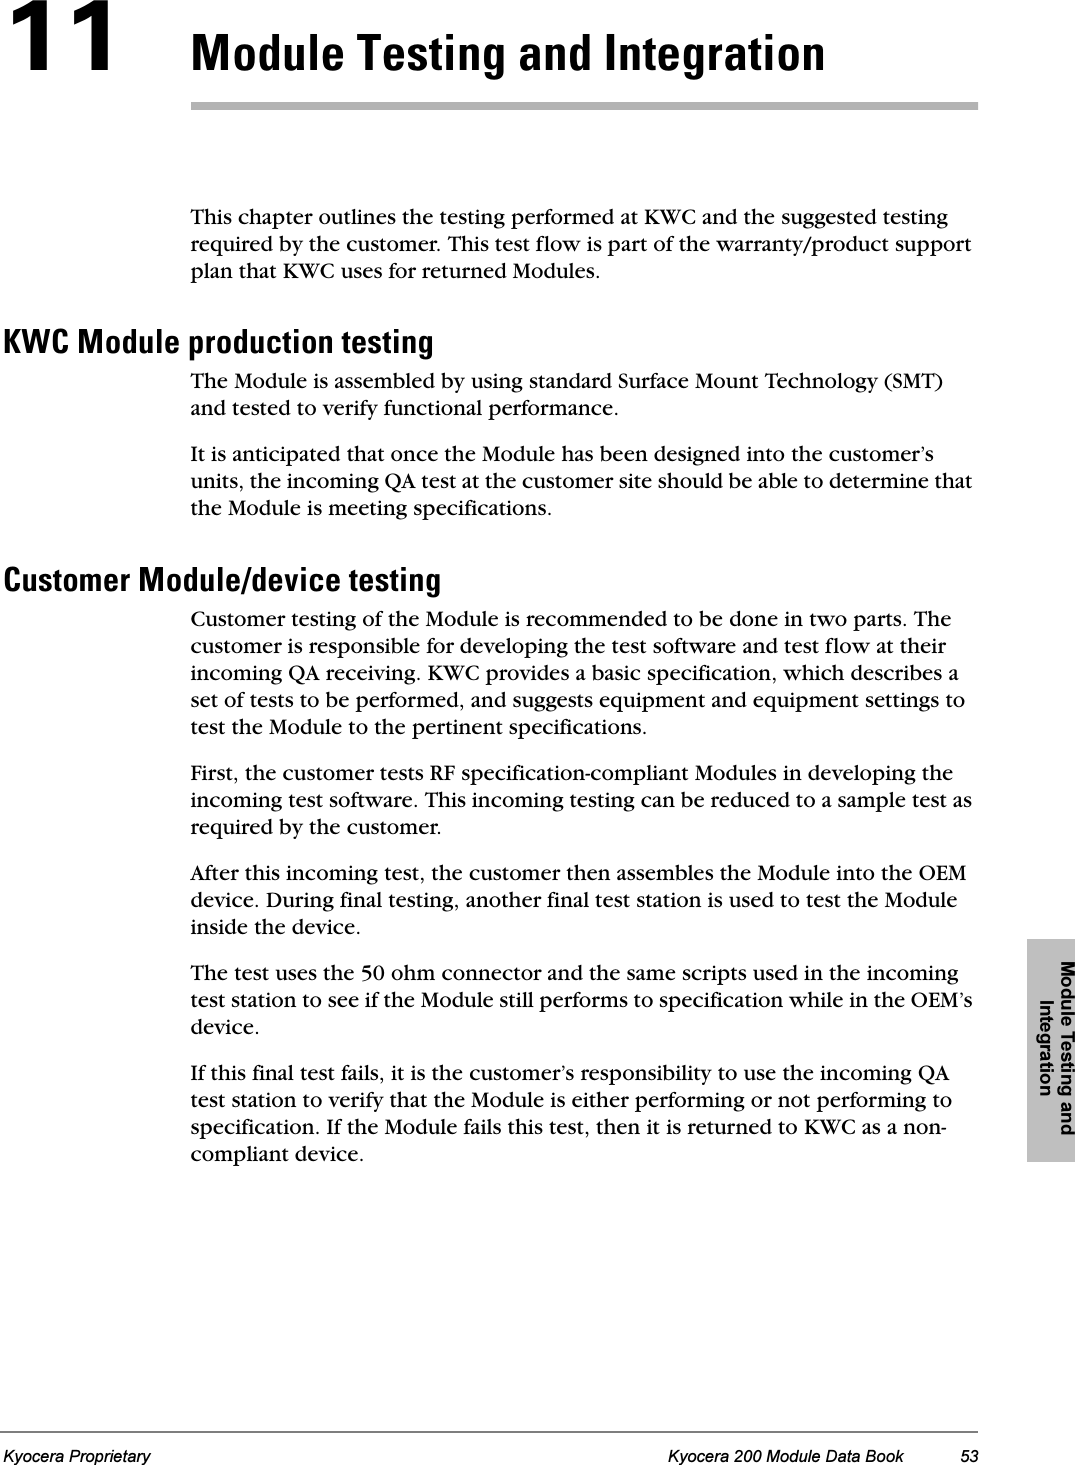 Module Testing and IntegrationKyocera Proprietary Kyocera 200 Module Data Book 53NNjçÇìäÉ=qÉëíáåÖ=~åÇ=fåíÉÖê~íáçåThis chapter outlines the testing performed at KWC and the suggested testing required by the customer. This test flow is part of the warranty/product support plan that KWC uses for returned Modules.ht`=jçÇìäÉ=éêçÇìÅíáçå=íÉëíáåÖThe Module is assembled by using standard Surface Mount Technology (SMT) and tested to verify functional performance. It is anticipated that once the Module has been designed into the customer’s units, the incoming QA test at the customer site should be able to determine that the Module is meeting specifications. `ìëíçãÉê=jçÇìäÉLÇÉîáÅÉ=íÉëíáåÖCustomer testing of the Module is recommended to be done in two parts. The customer is responsible for developing the test software and test flow at their incoming QA receiving. KWC provides a basic specification, which describes a set of tests to be performed, and suggests equipment and equipment settings to test the Module to the pertinent specifications.First, the customer tests RF specification-compliant Modules in developing the incoming test software. This incoming testing can be reduced to a sample test as required by the customer.After this incoming test, the customer then assembles the Module into the OEM device. During final testing, another final test station is used to test the Module inside the device.The test uses the 50 ohm connector and the same scripts used in the incoming test station to see if the Module still performs to specification while in the OEM’s device.If this final test fails, it is the customer’s responsibility to use the incoming QA test station to verify that the Module is either performing or not performing to specification. If the Module fails this test, then it is returned to KWC as a non-compliant device. 